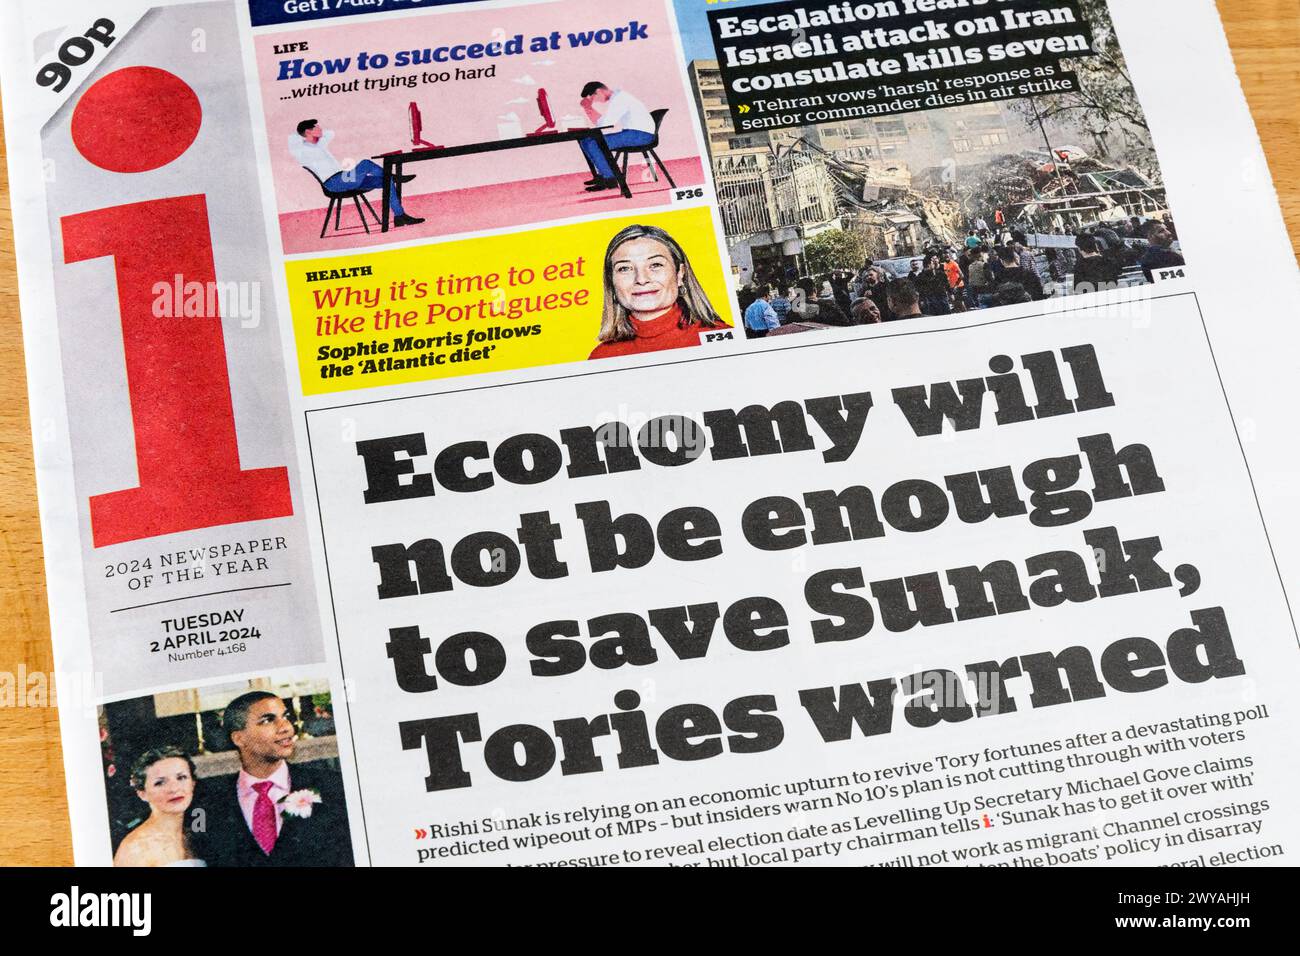 2 April 2024. Headlin in i newspaper reads: Economy will not be enough to save Sunak, Tories warned. Stock Photo